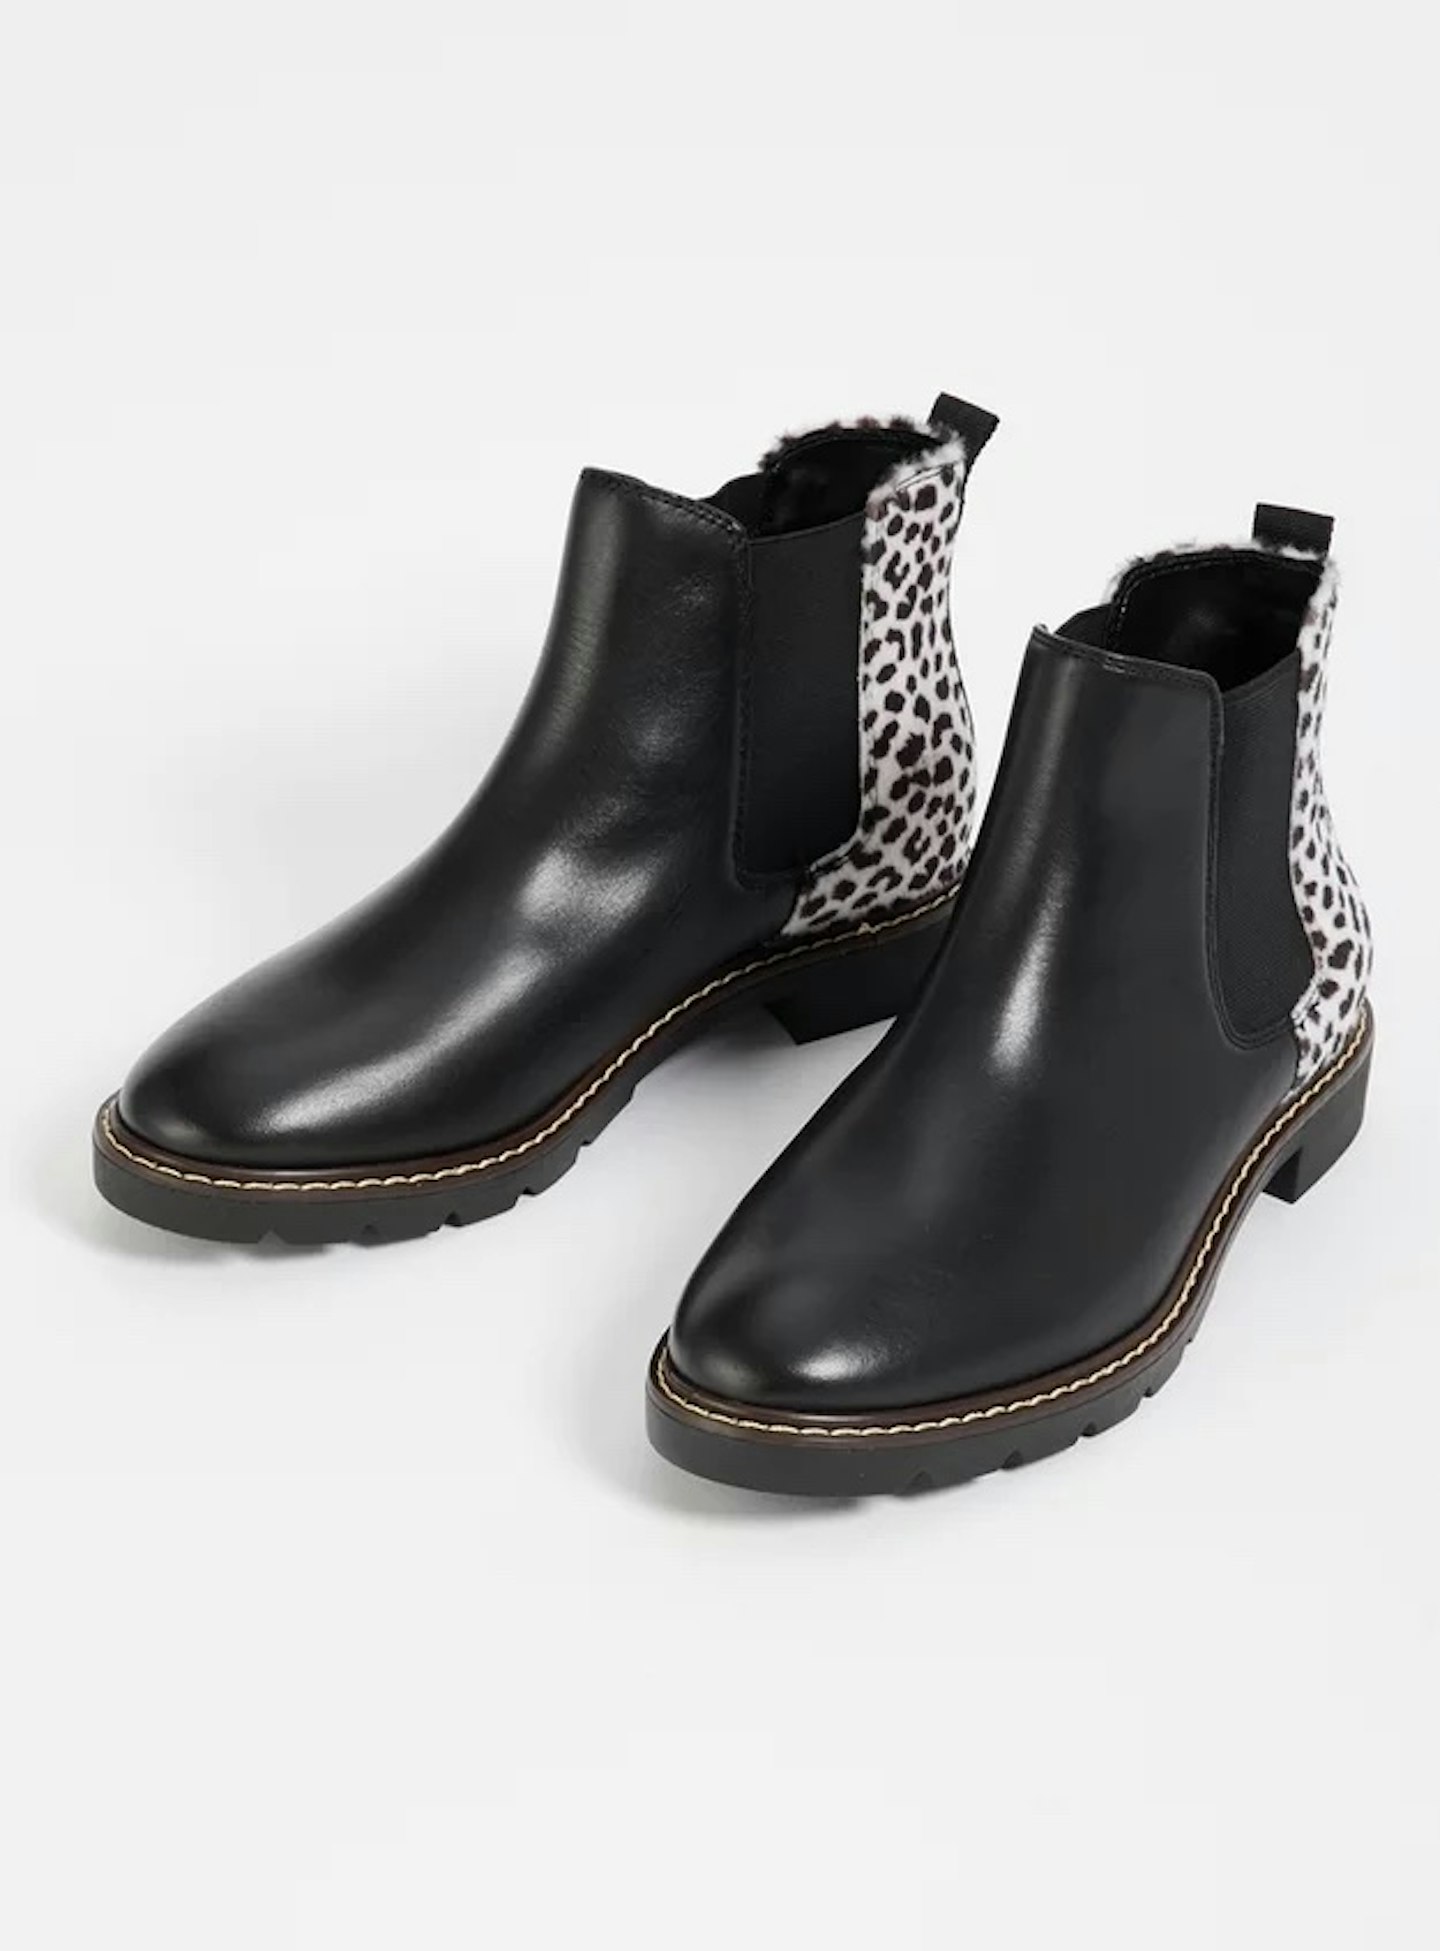 Leather Leopard Print Chelsea Boots, 40